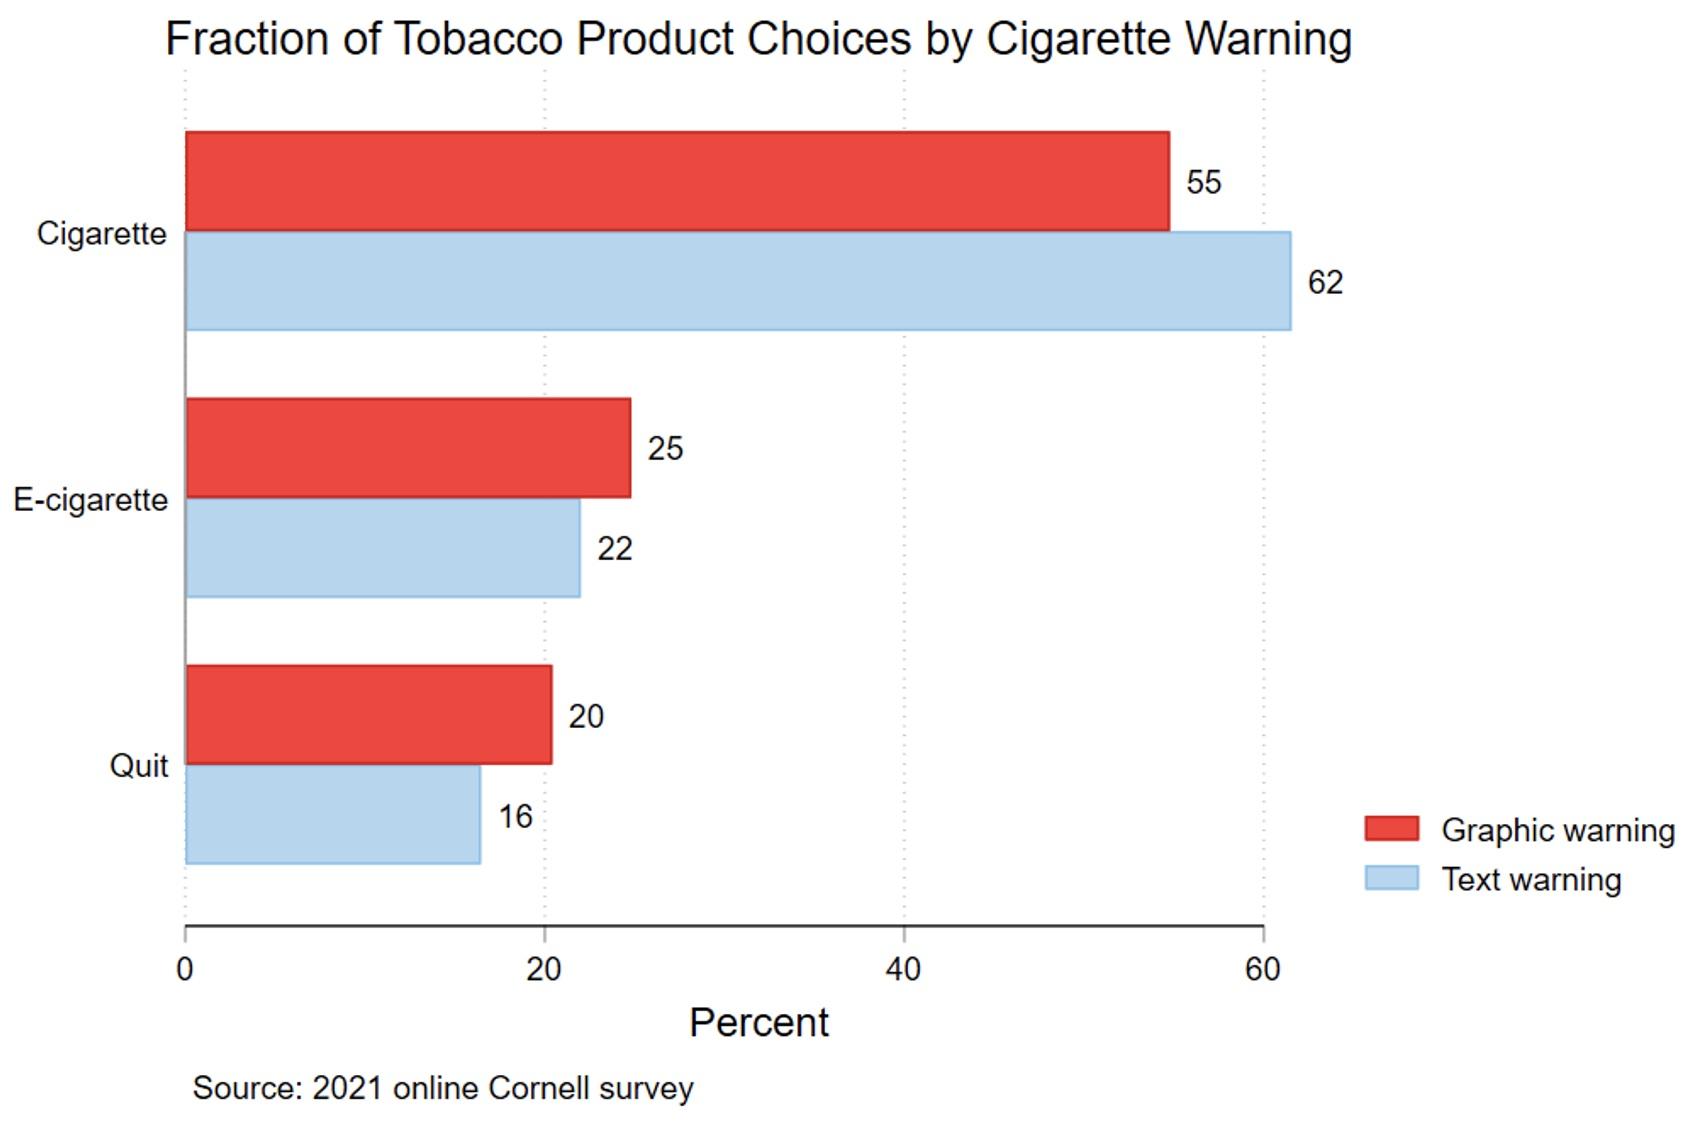 Figure 2 Fraction that chose cigarette/e-cigarette/quitting, by warning type